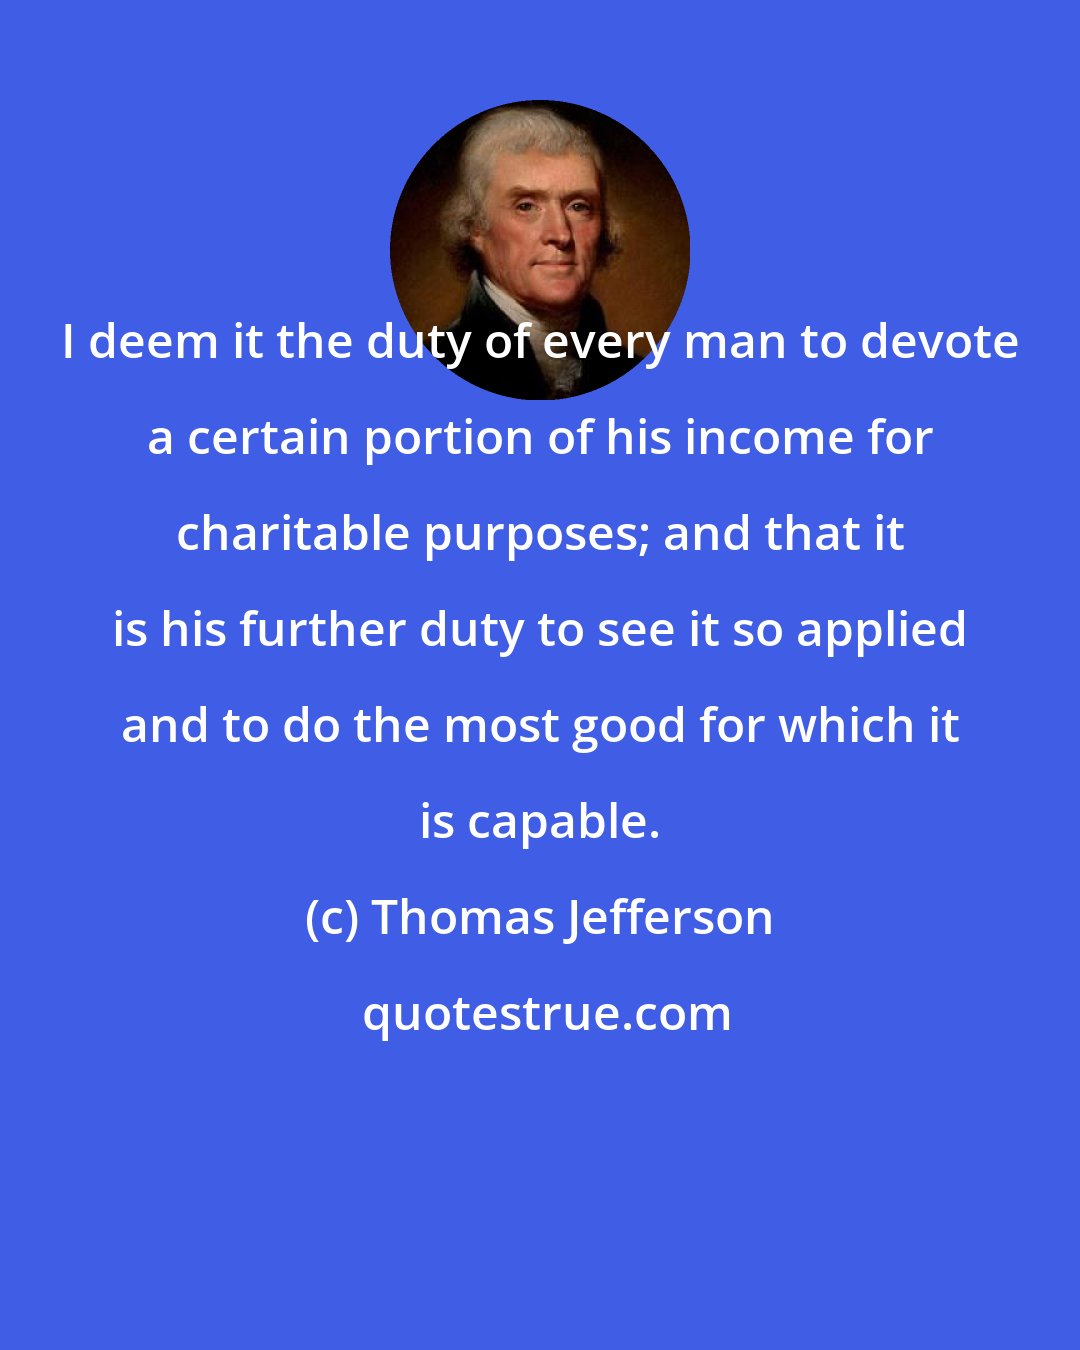 Thomas Jefferson: I deem it the duty of every man to devote a certain portion of his income for charitable purposes; and that it is his further duty to see it so applied and to do the most good for which it is capable.